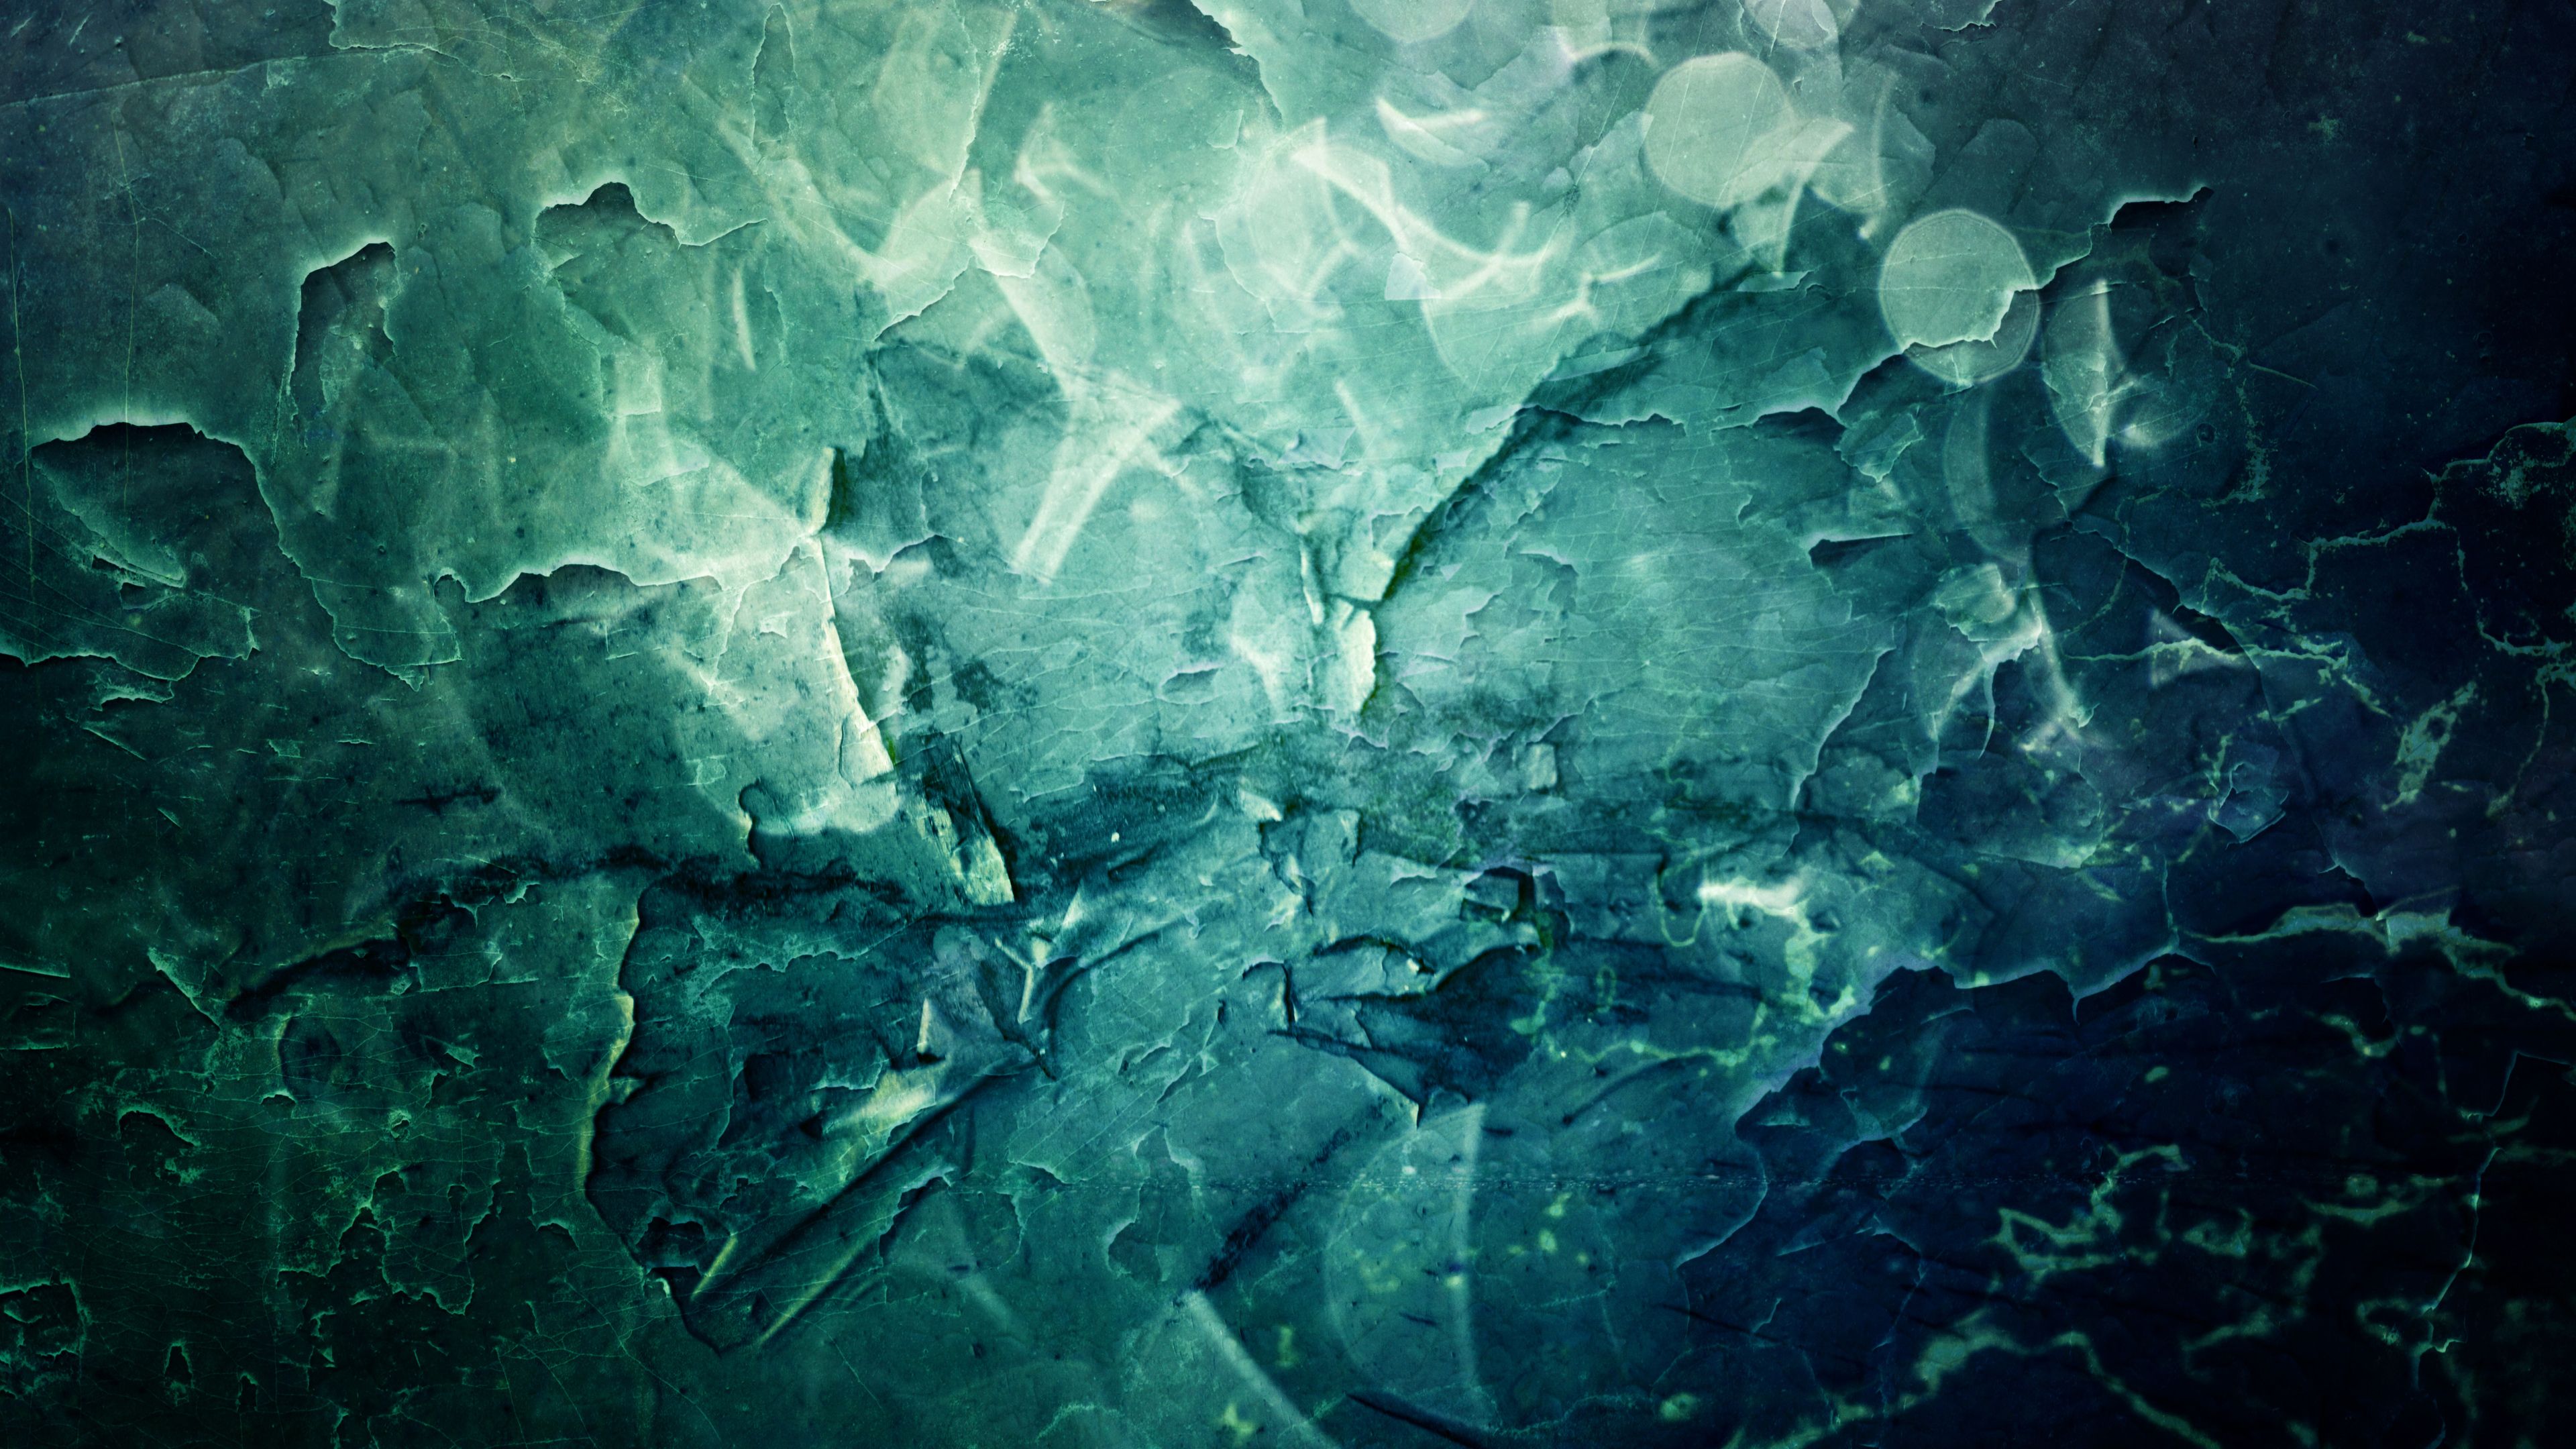 Abstract Texture Hd Wallpapers Wallpaper Cave